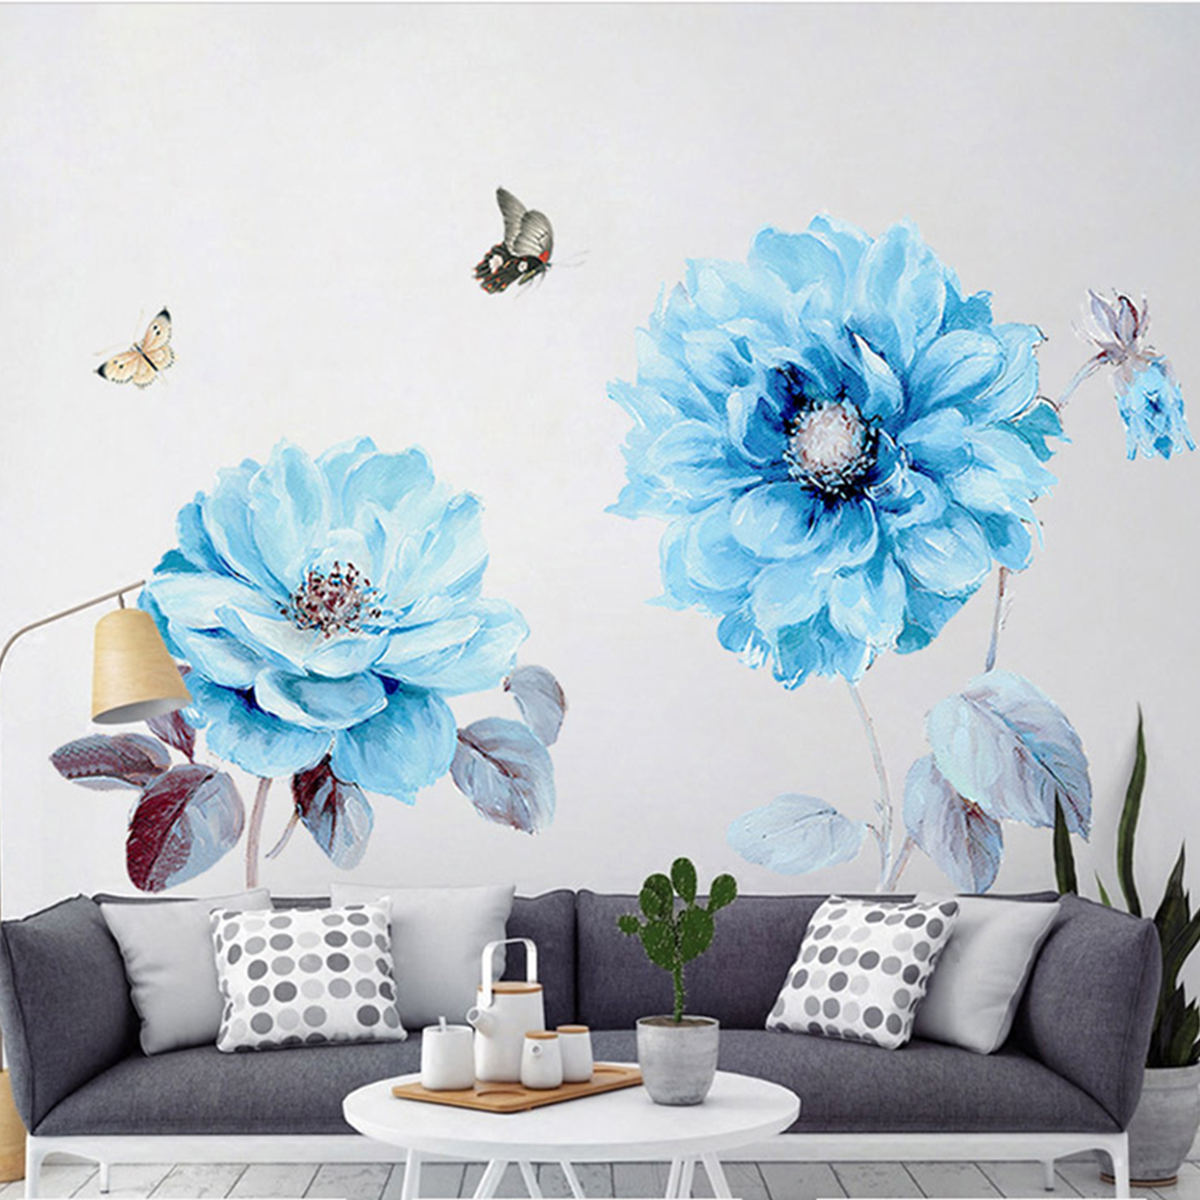 Blue-Flowers-Wall-Sticker-Room-Sticker-Living-Room-Background-Bedroom-Decorations-1524262-1